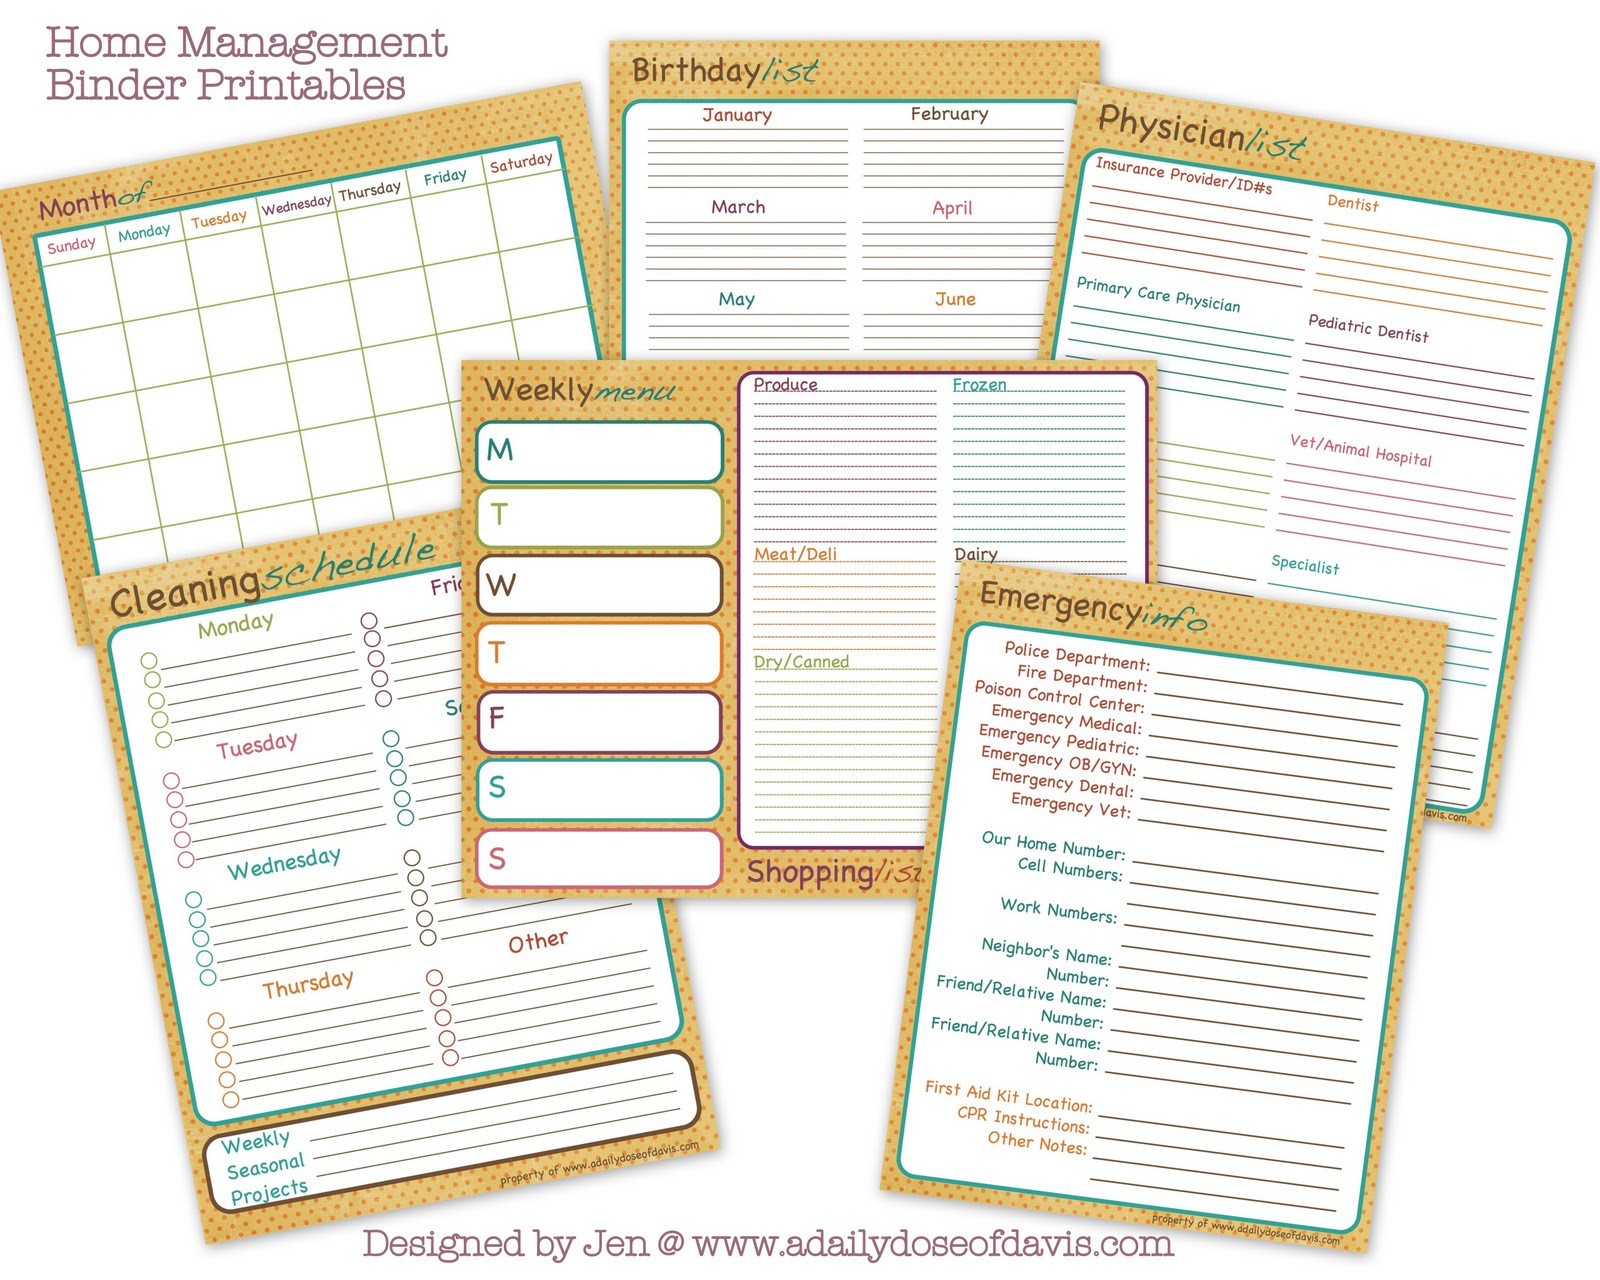 Home Organization Binder
 Life More Simply Tips for creating your Home Management